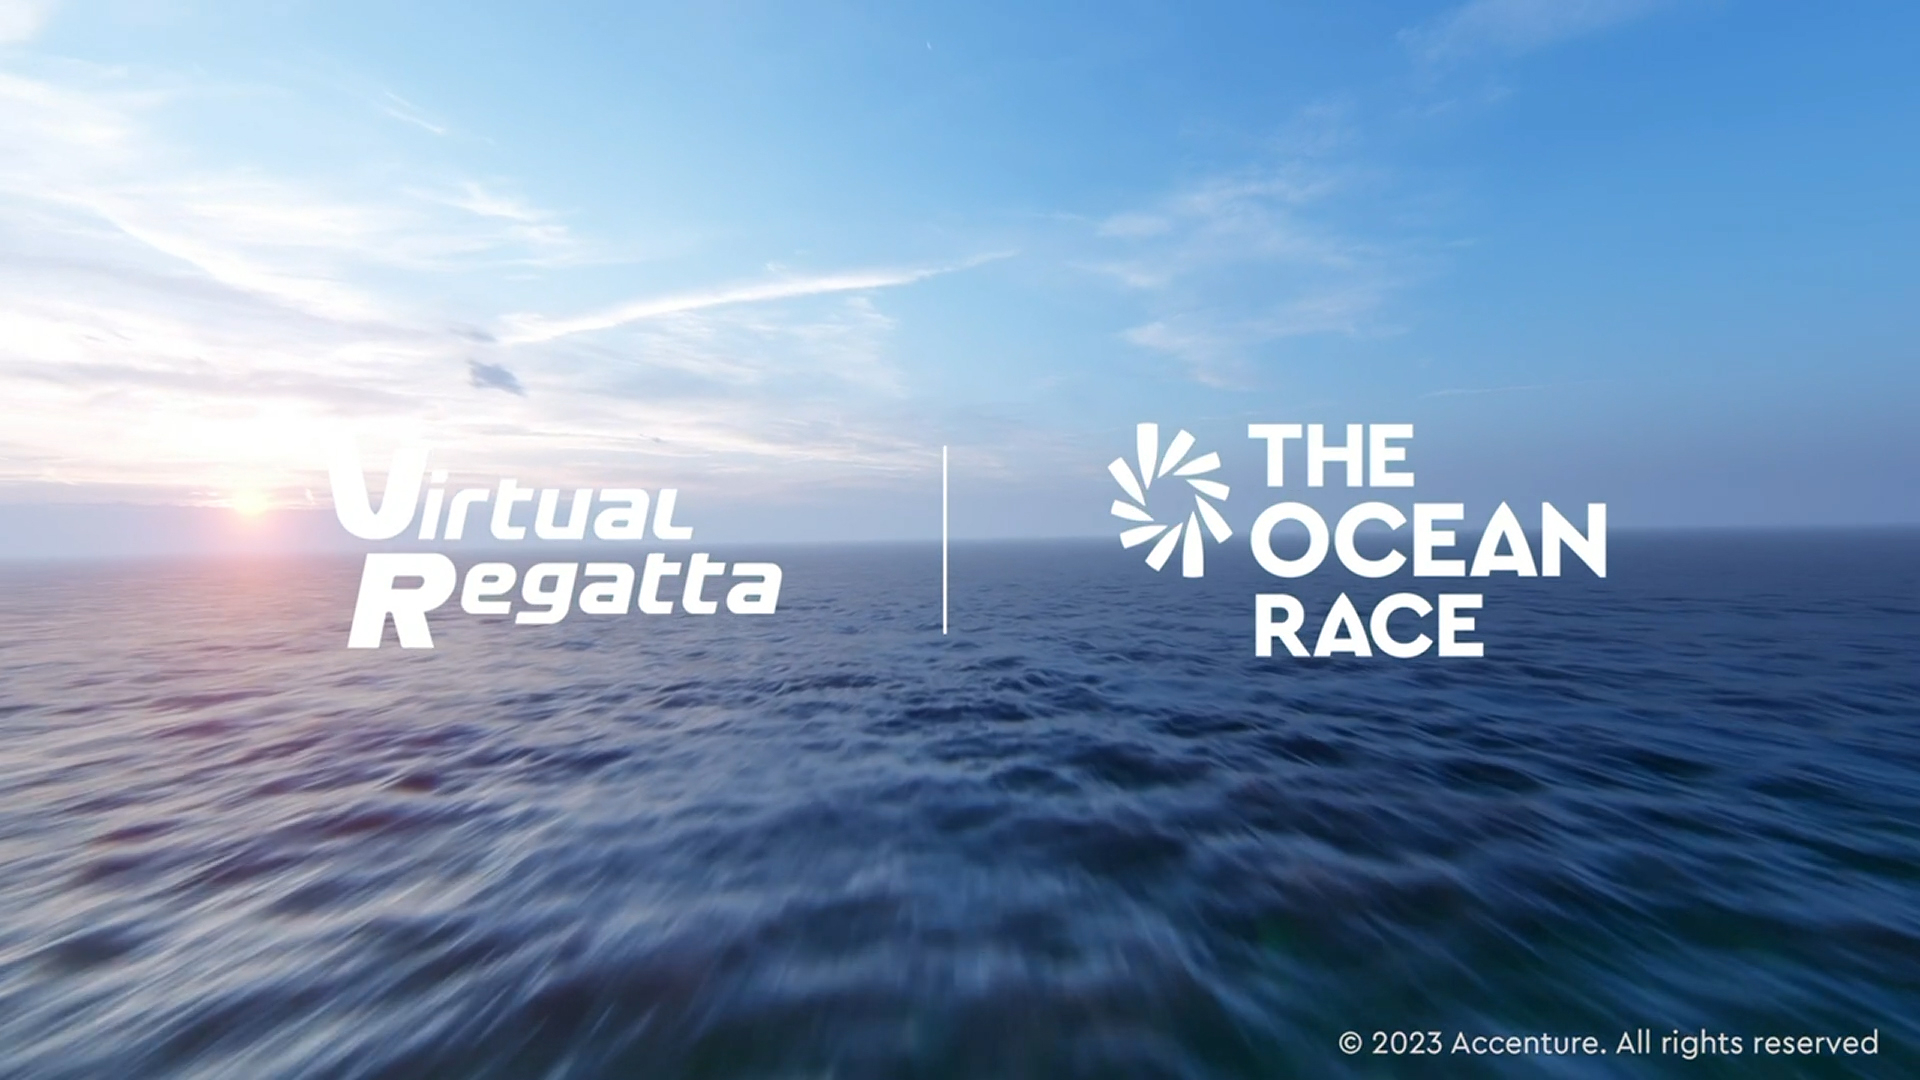 The Ocean Race launched a metaverse experience pilot today with Virtual Regatta and Accenture to engage fans and businesses in a new way with the world-renowned, global yacht race.